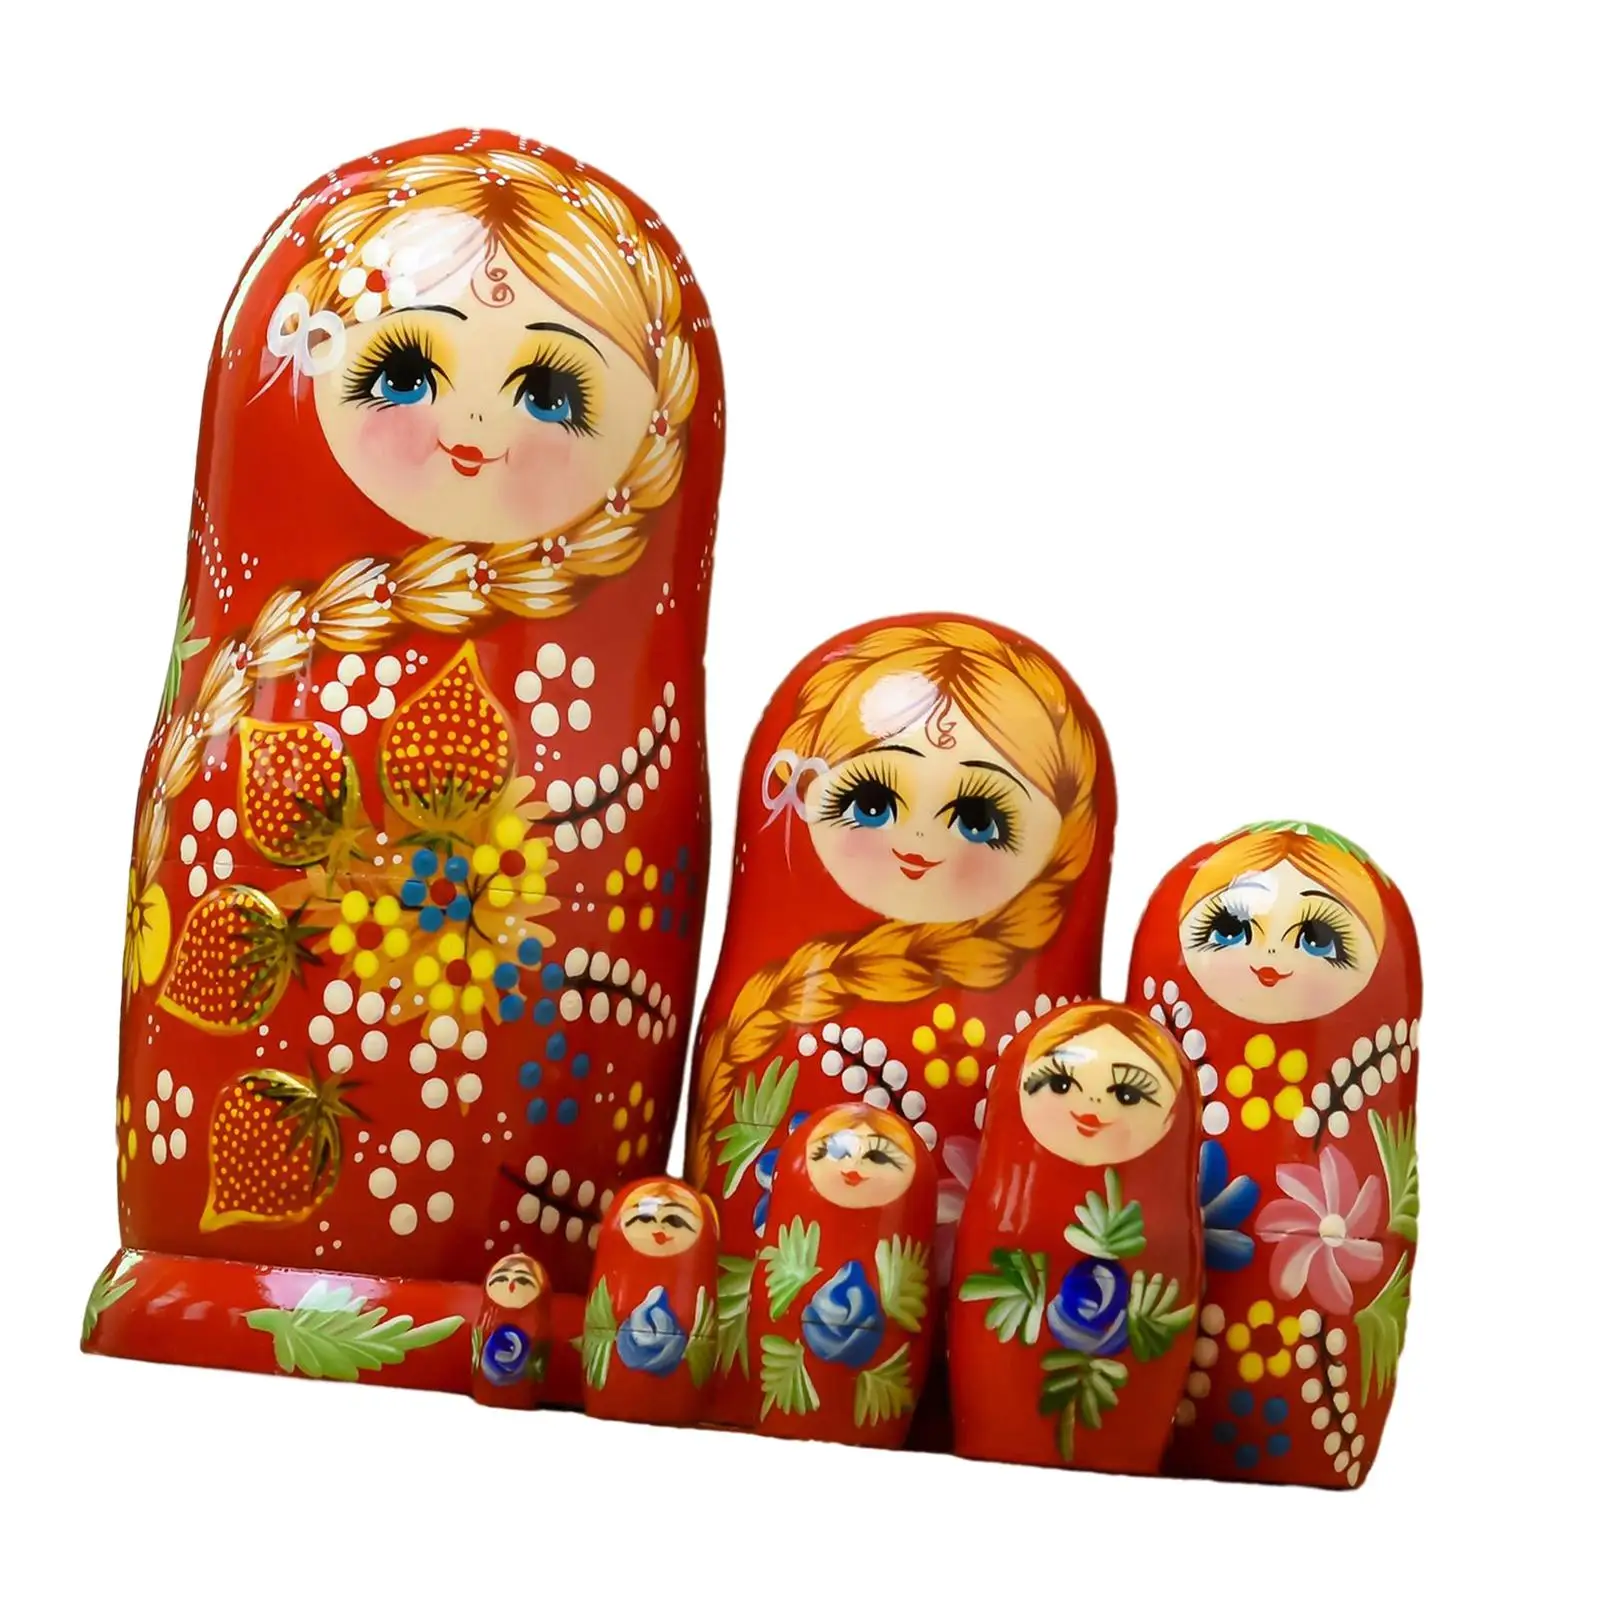 

7x Russian Nesting Doll Hand Painted Traditional Home Decor Nesting Wishing Dolls for Kids Toddlers Birthday Table New Year 20cm